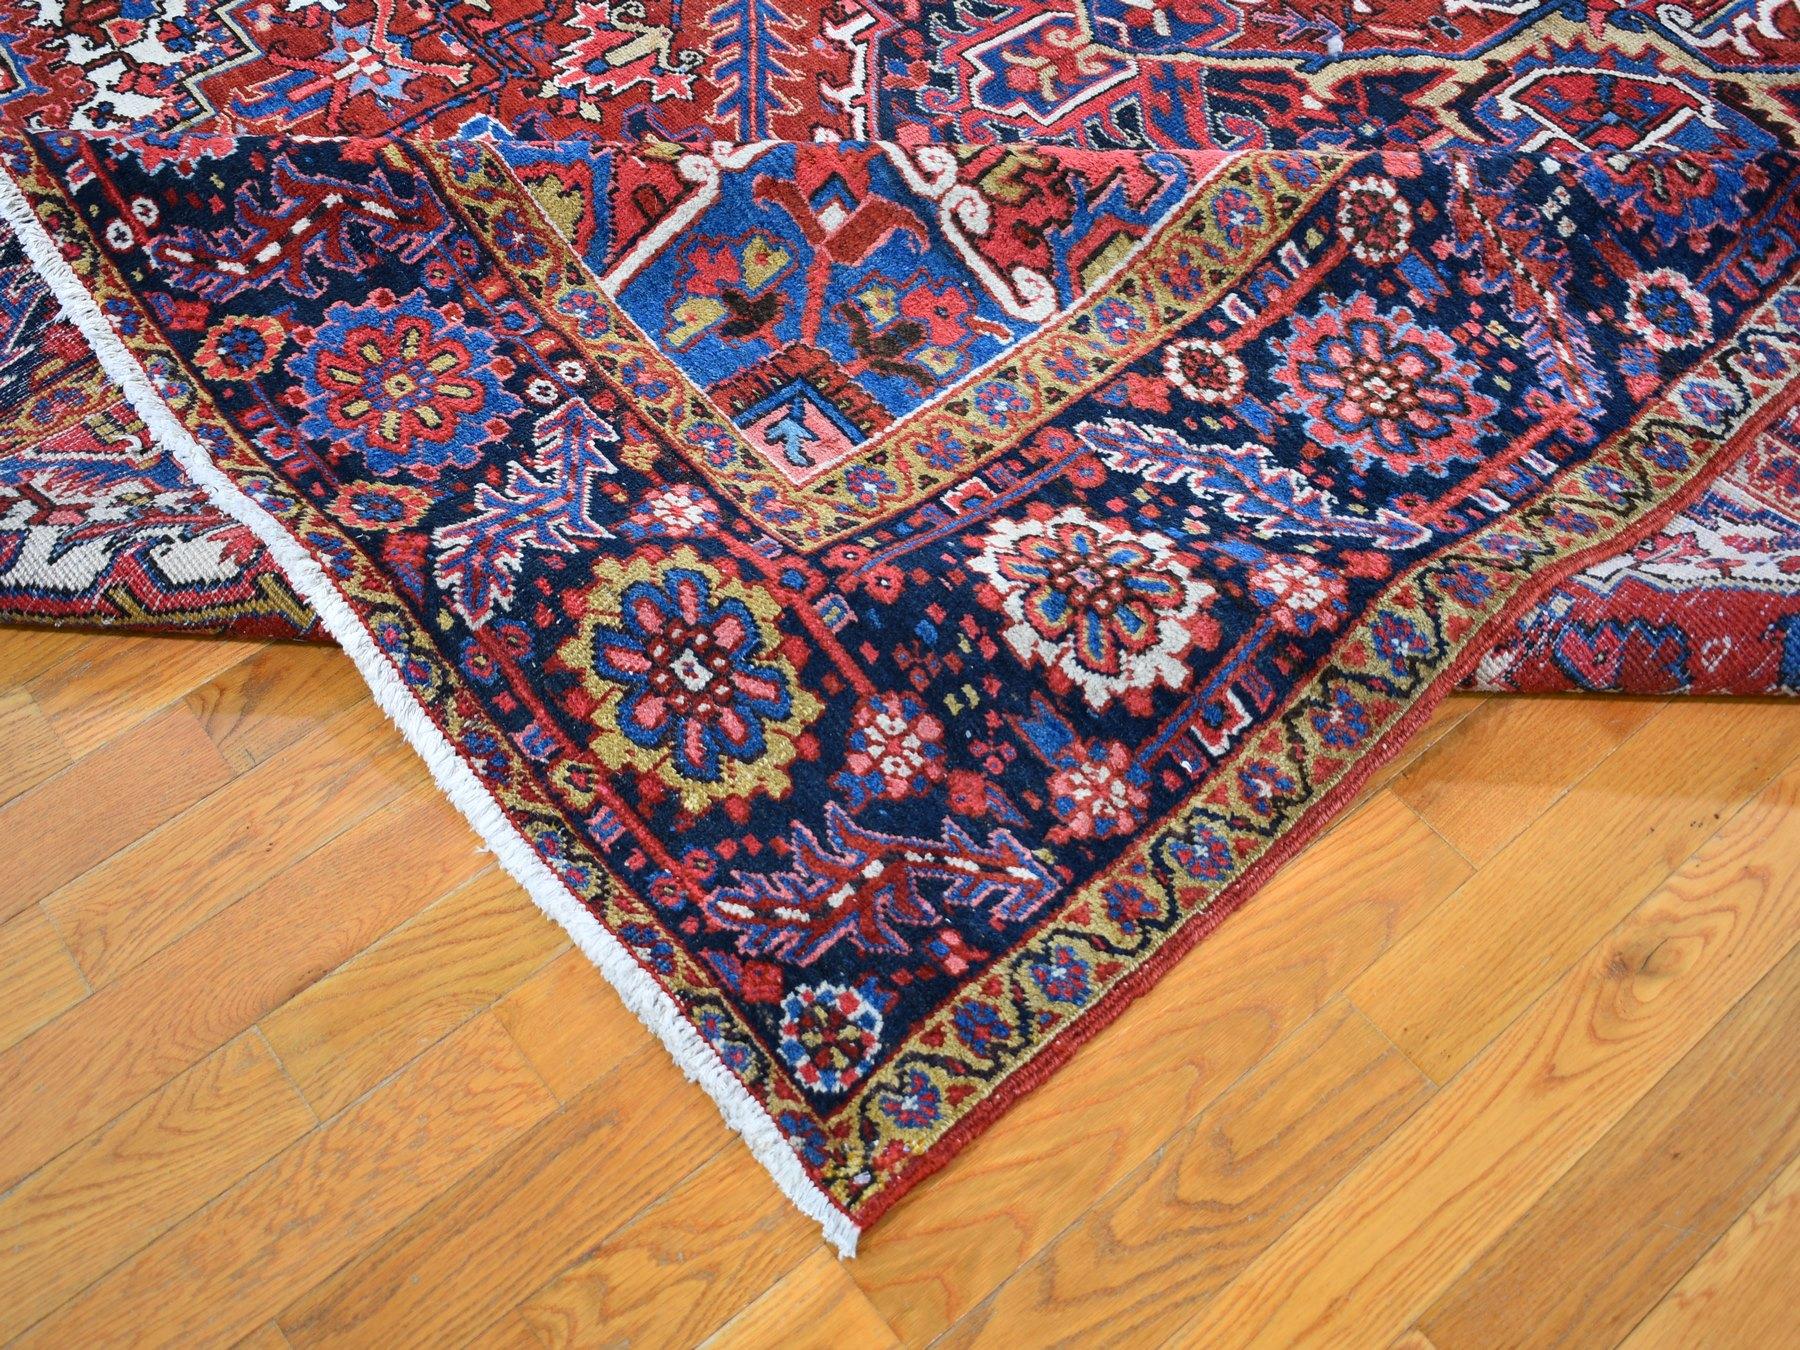 Early 20th Century Red Antique Persian Heriz circa 1920, Good Condition Clean Hand Knotted 